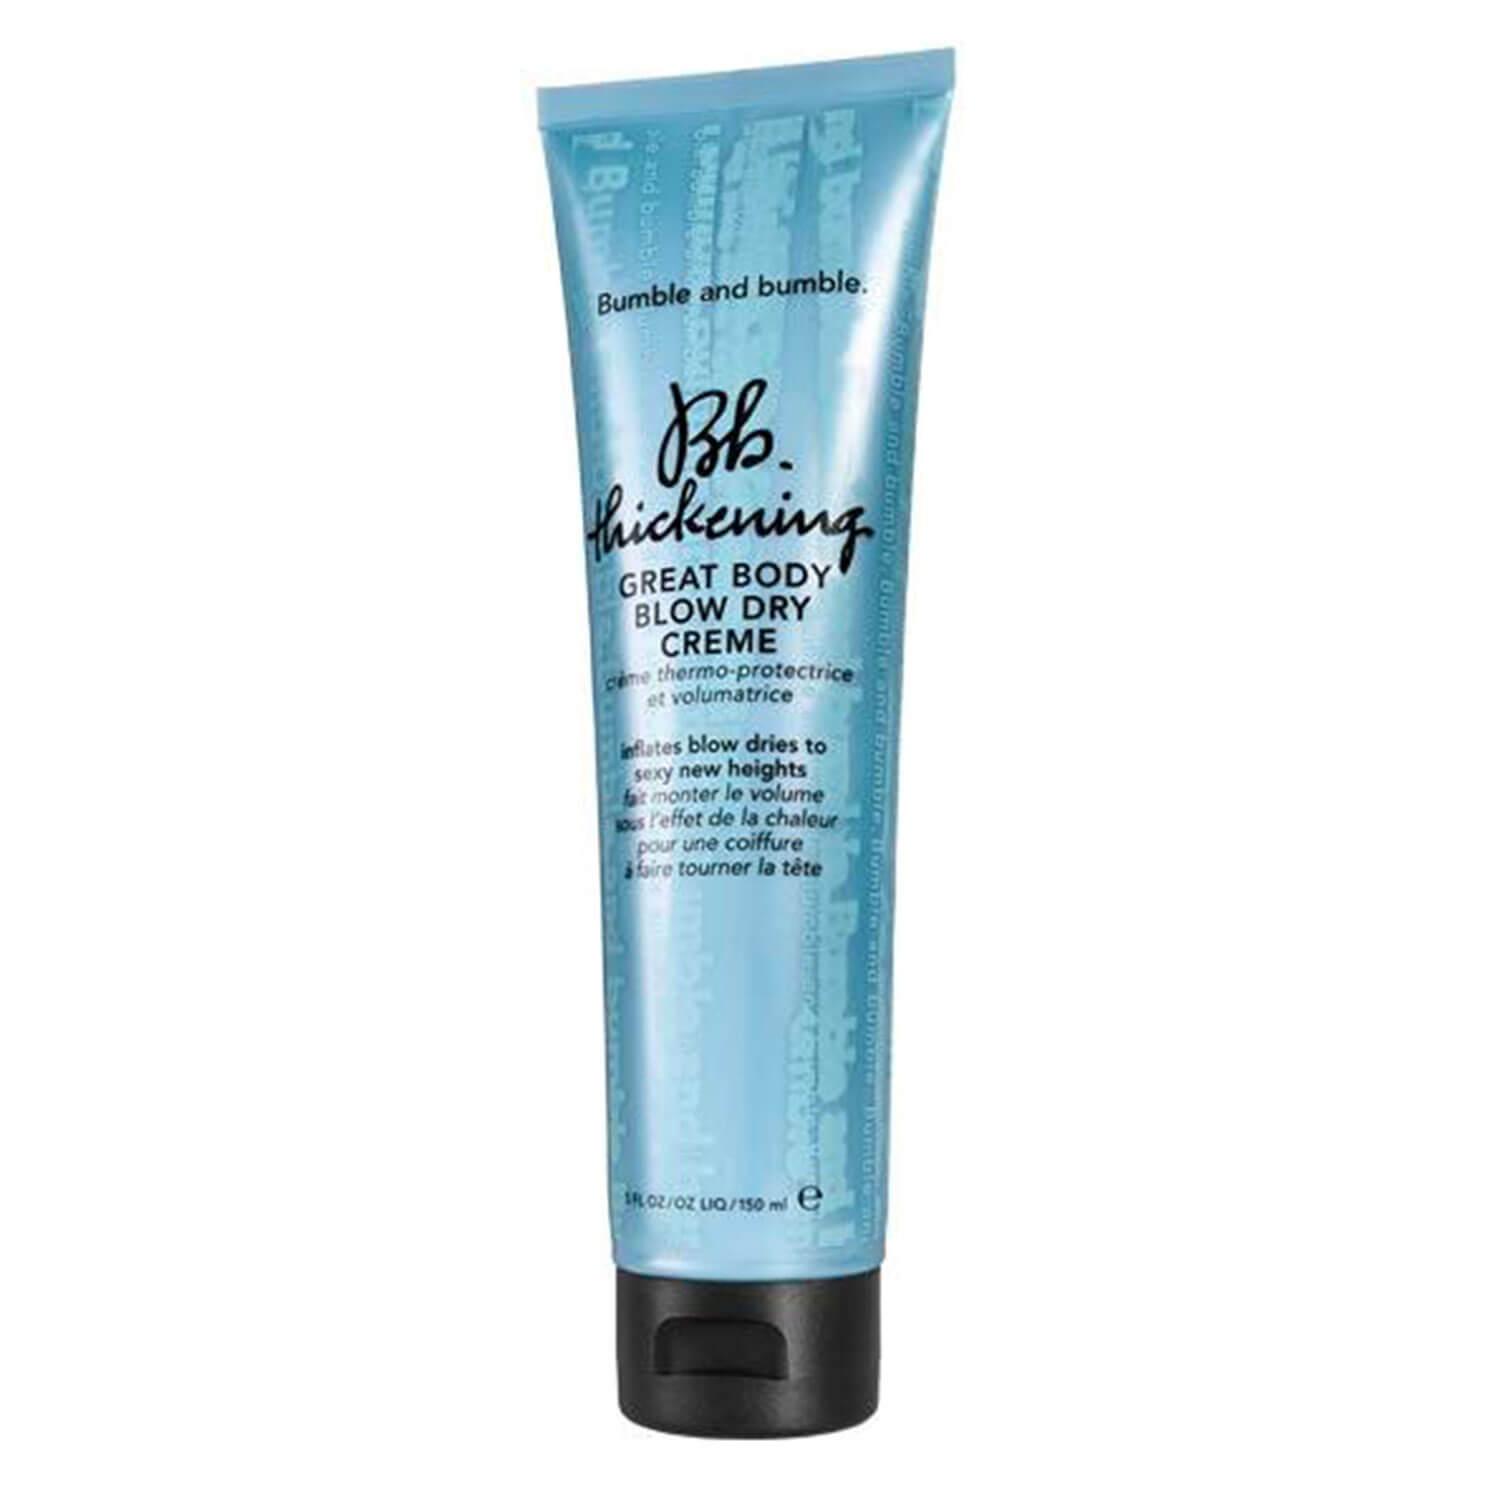 Bb. Thickening - Great Body Blow Dry Crème 